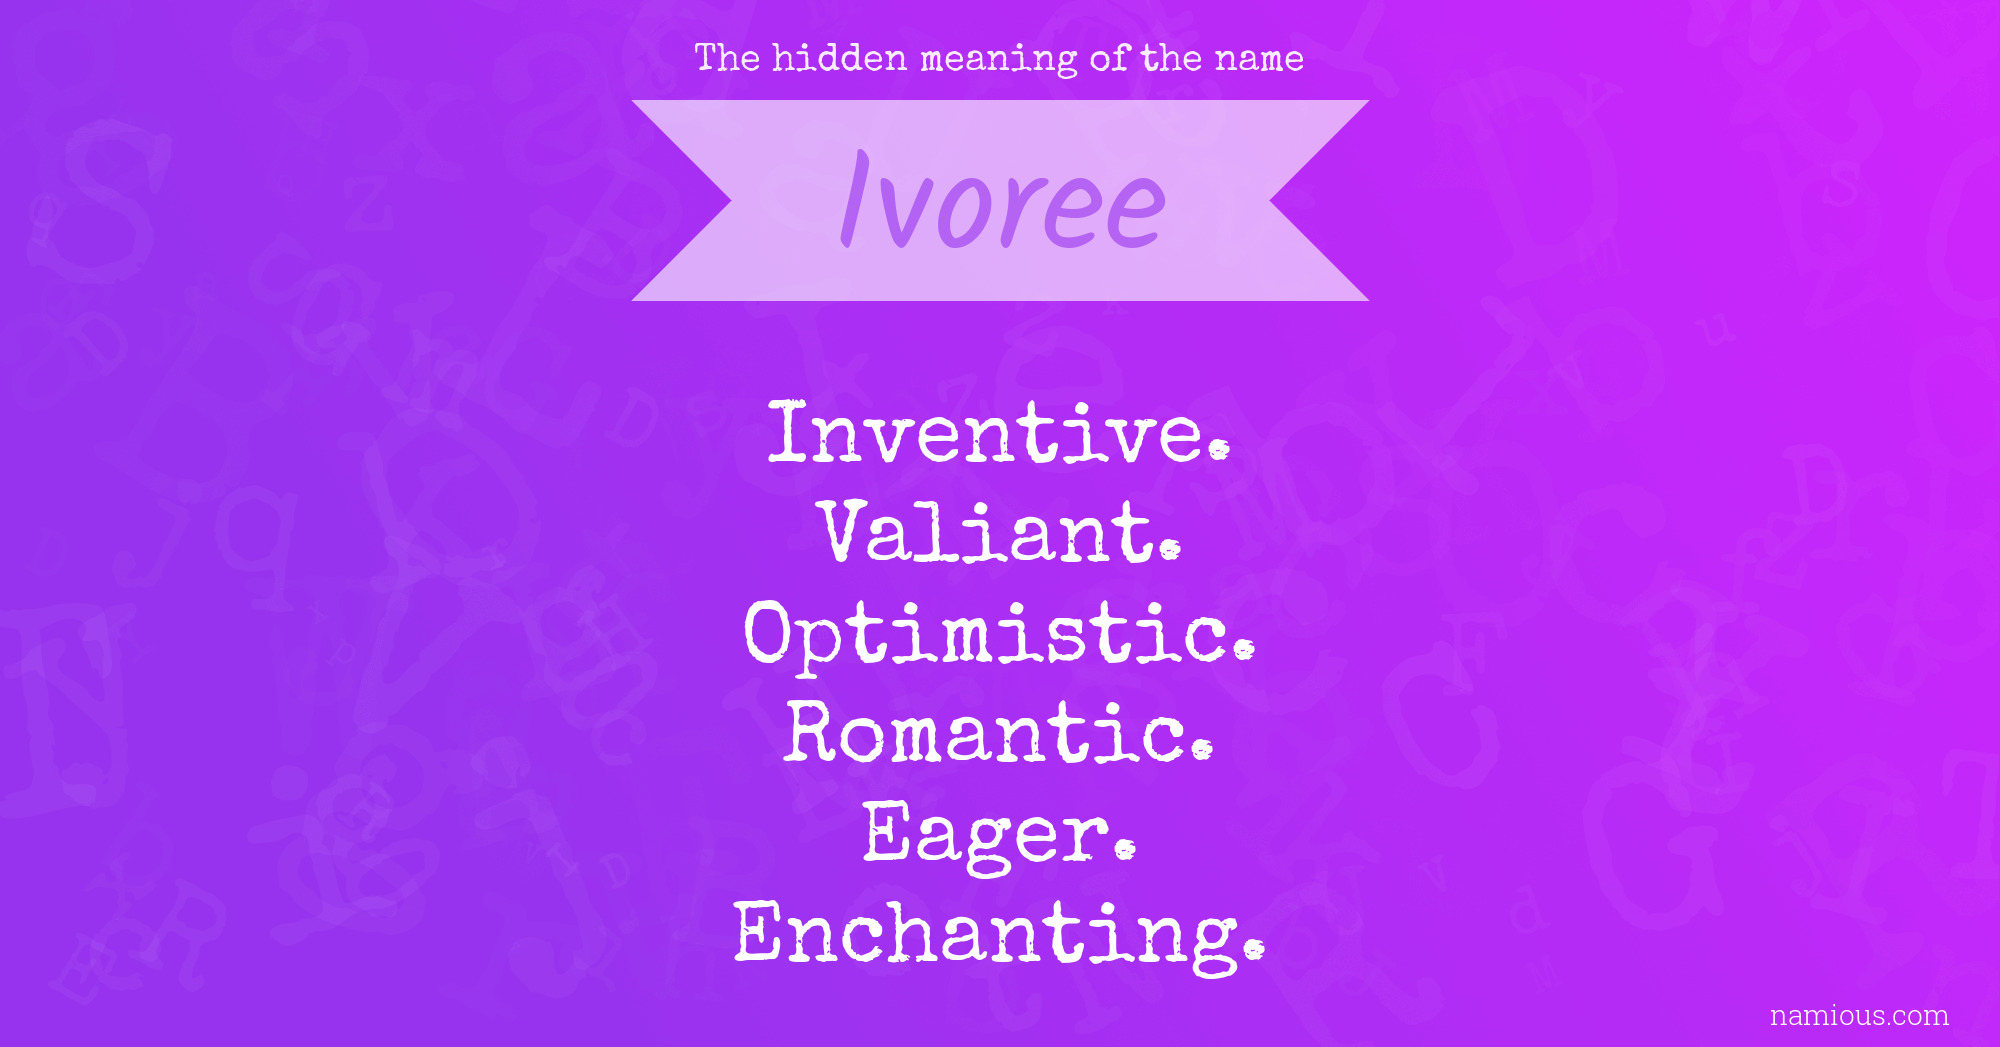 The hidden meaning of the name Ivoree